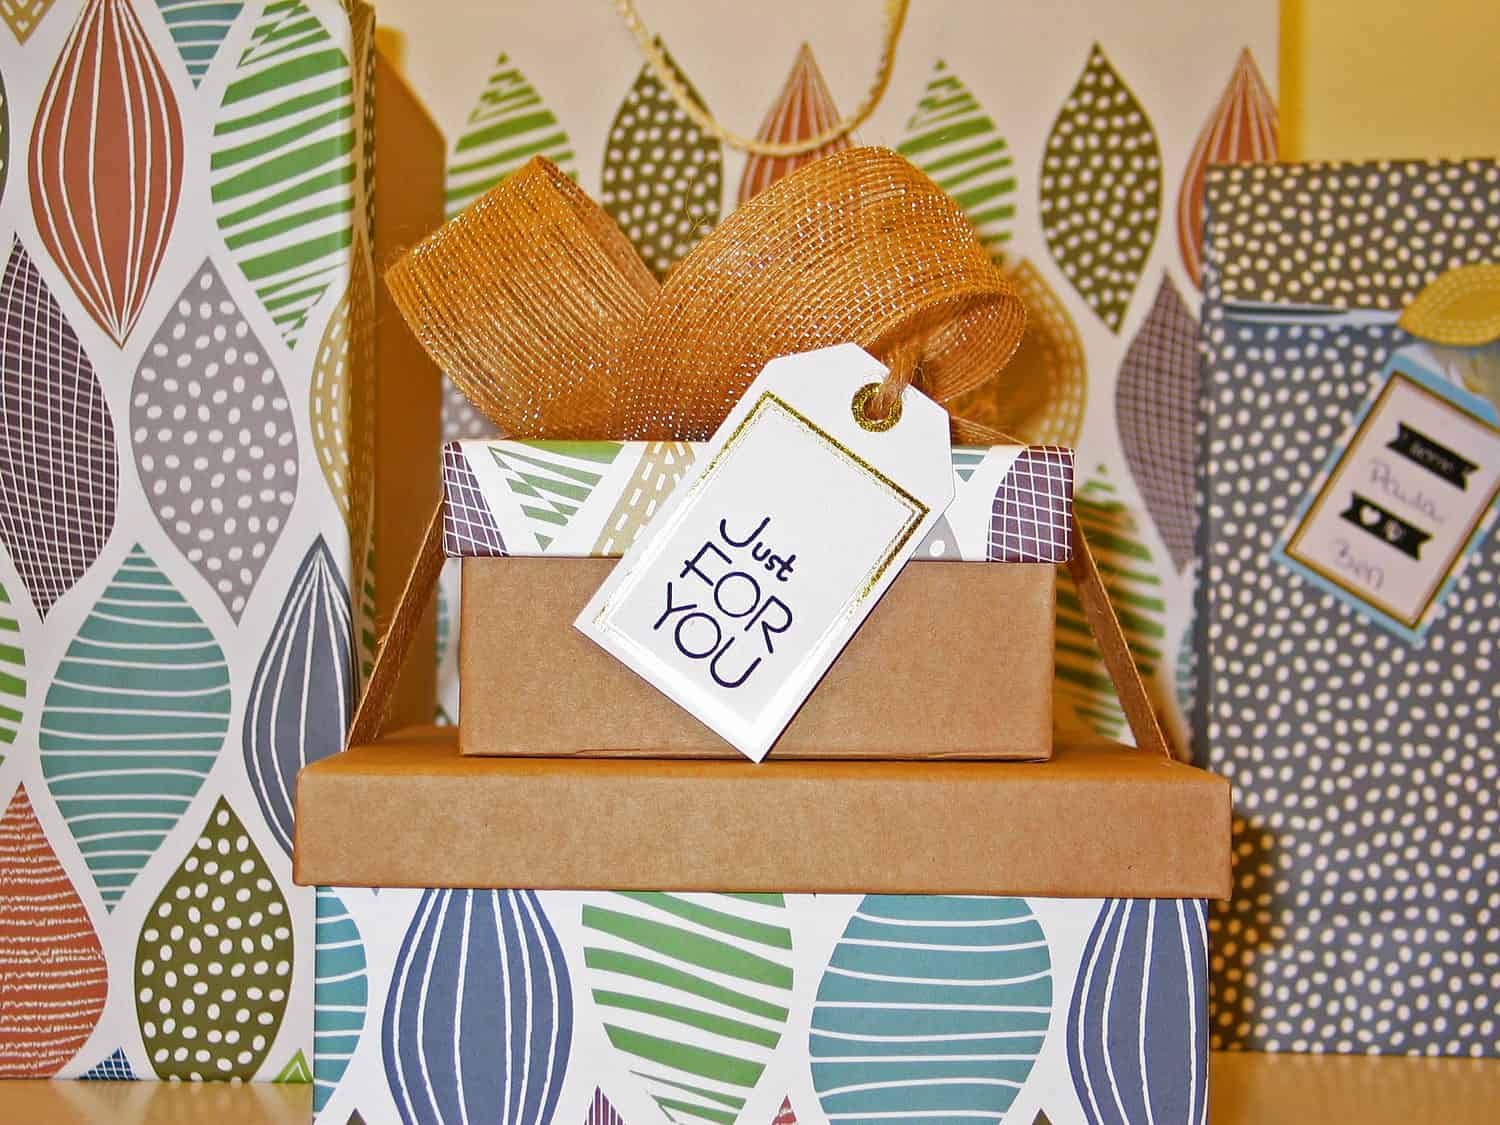 Stacked & neatly wrapped presents with a “For You” gift tag on them